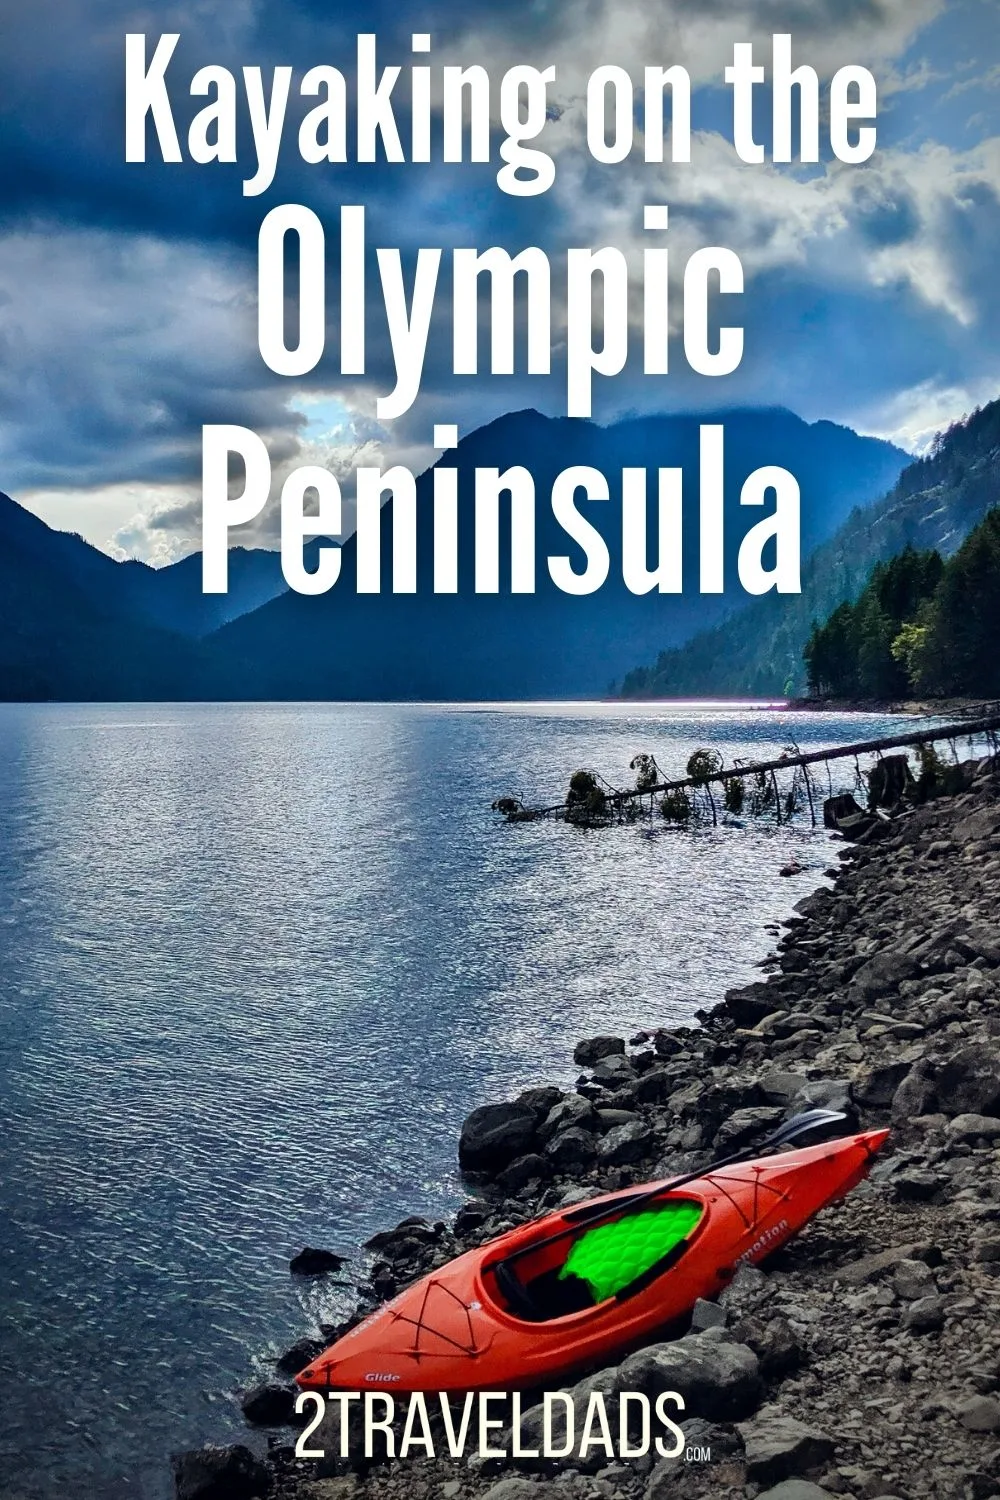 Kayaking on the Olympic Peninsula includes everything from snow-melt rivers to peaceful mountain lakes, from the Strait of Juan de Fuca, to the slow flowing tide of Hood Canal. This guide includes some of the best and most beautiful places to paddle on the Olympic Peninsula.